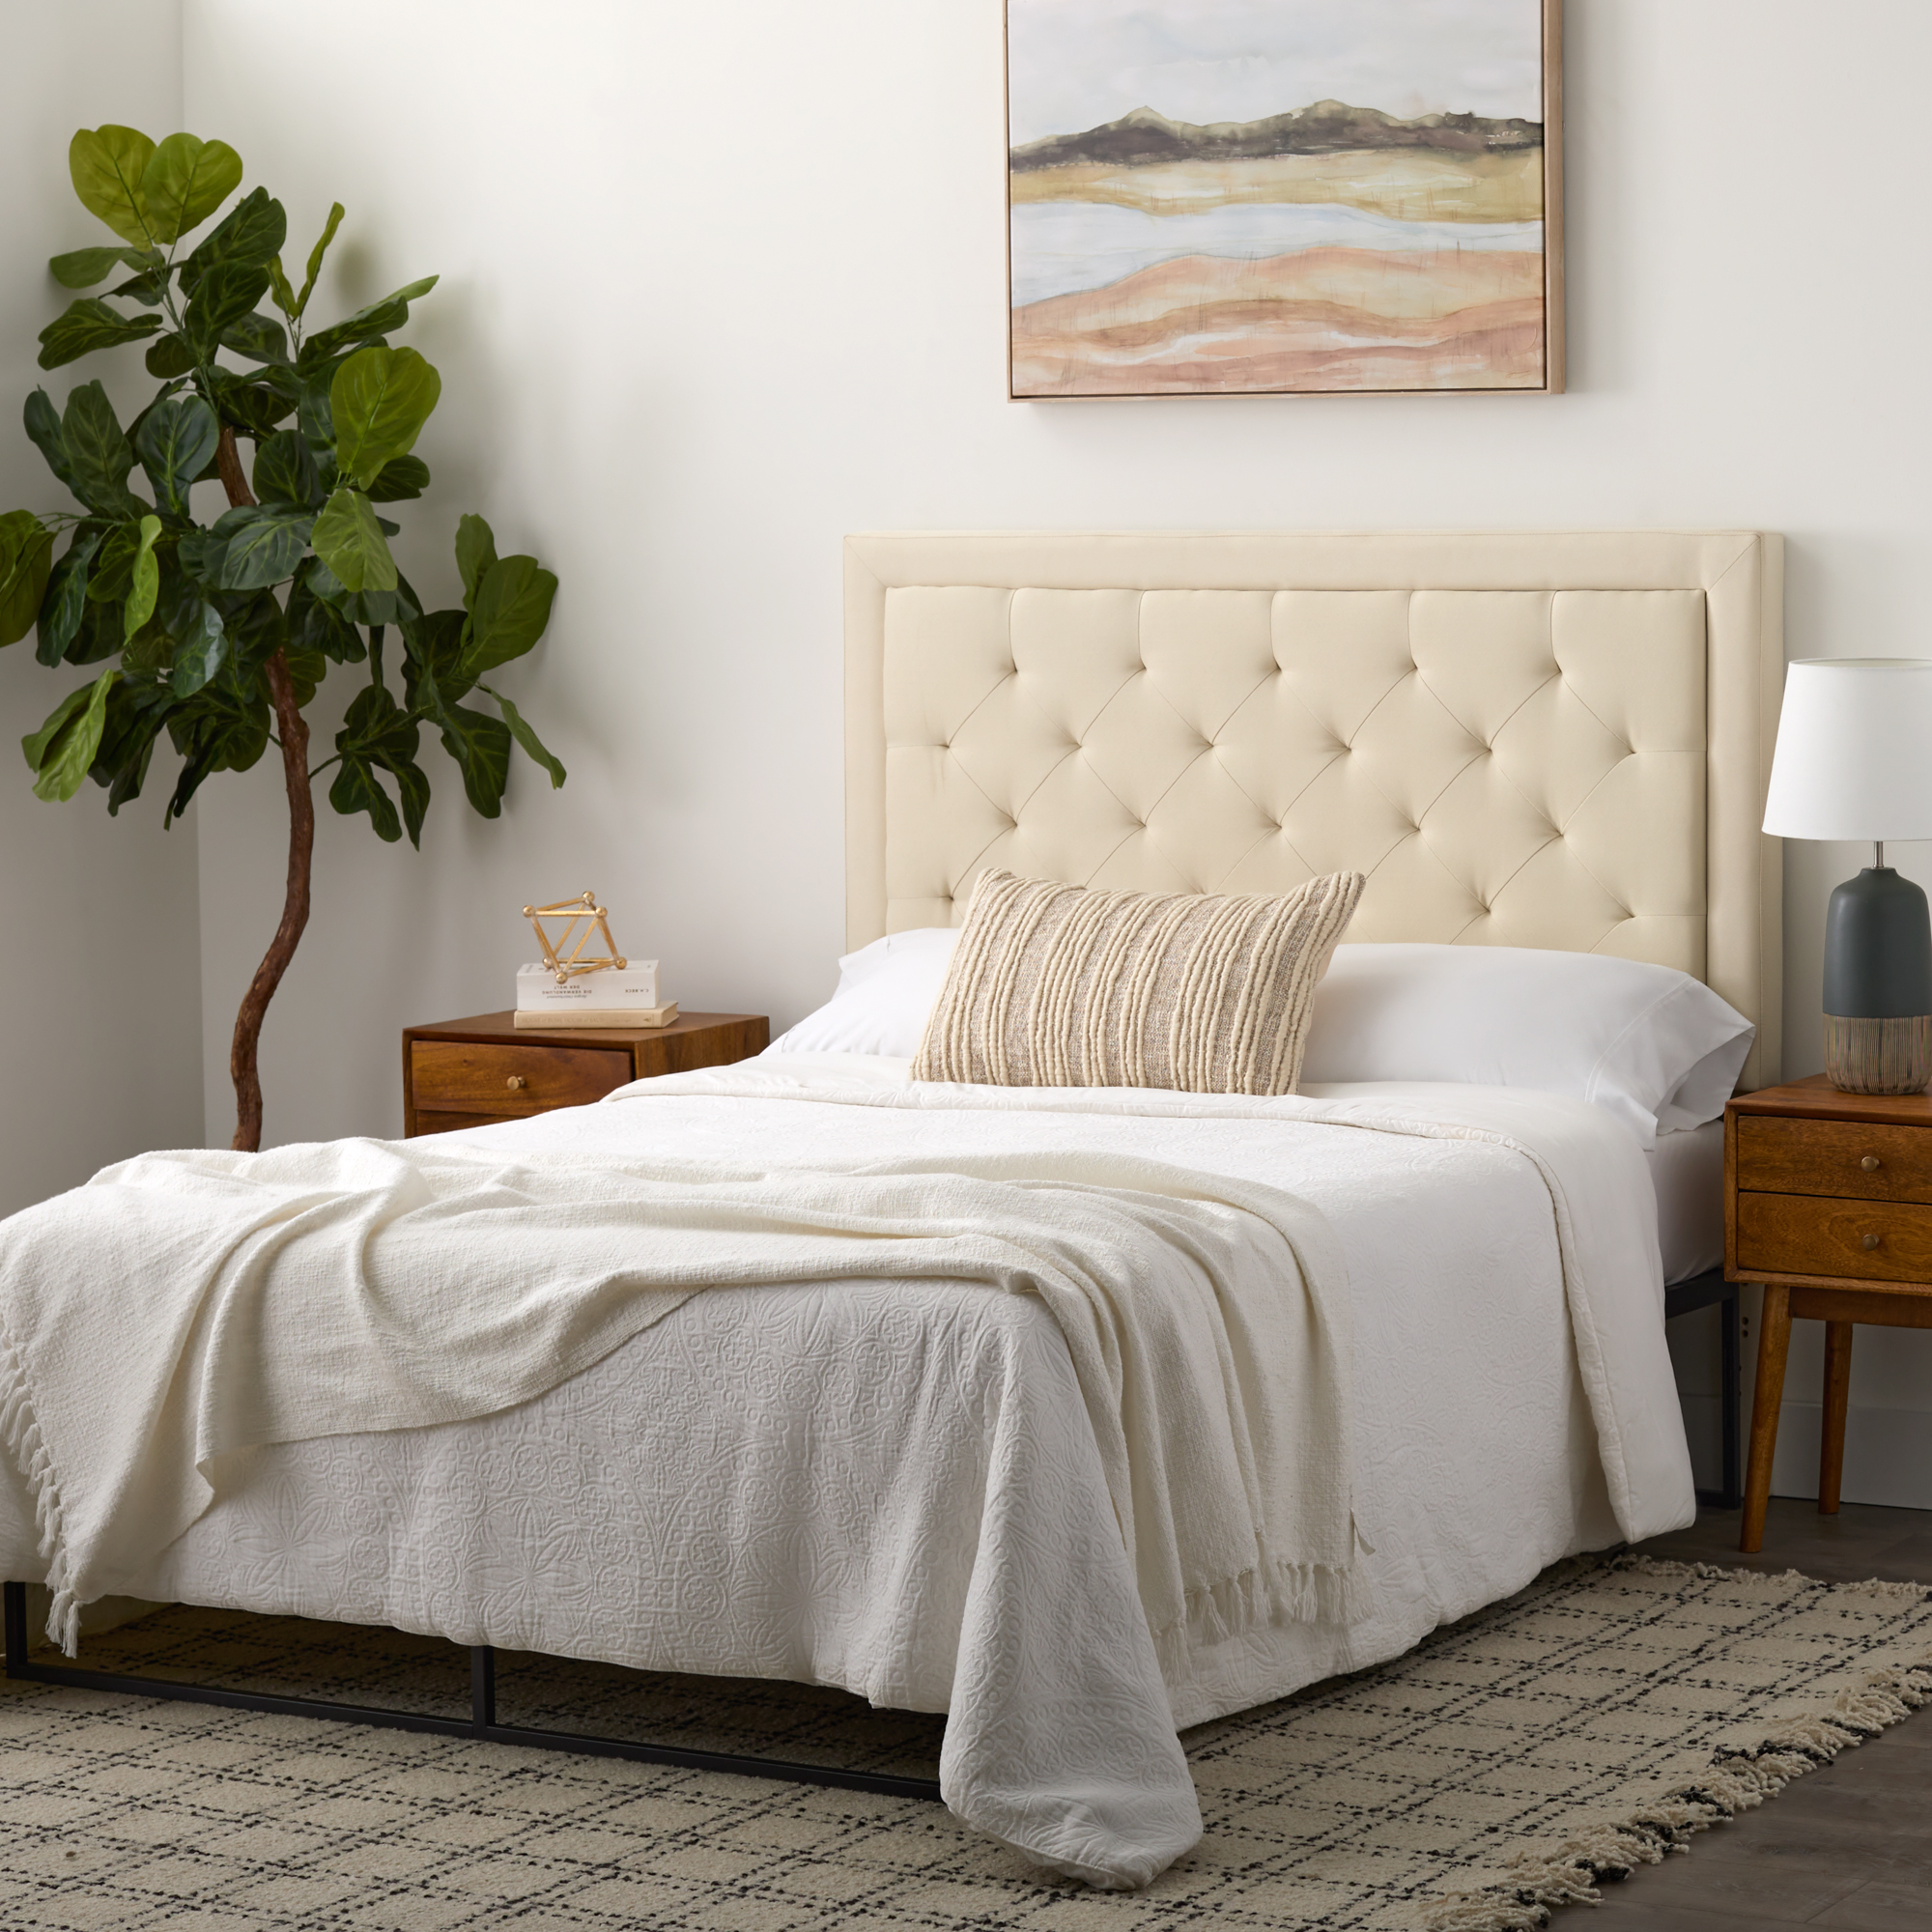 Rest Haven Medford Rectangle Upholstered Headboard with Diamond Tufting, Full, Cream - image 3 of 11